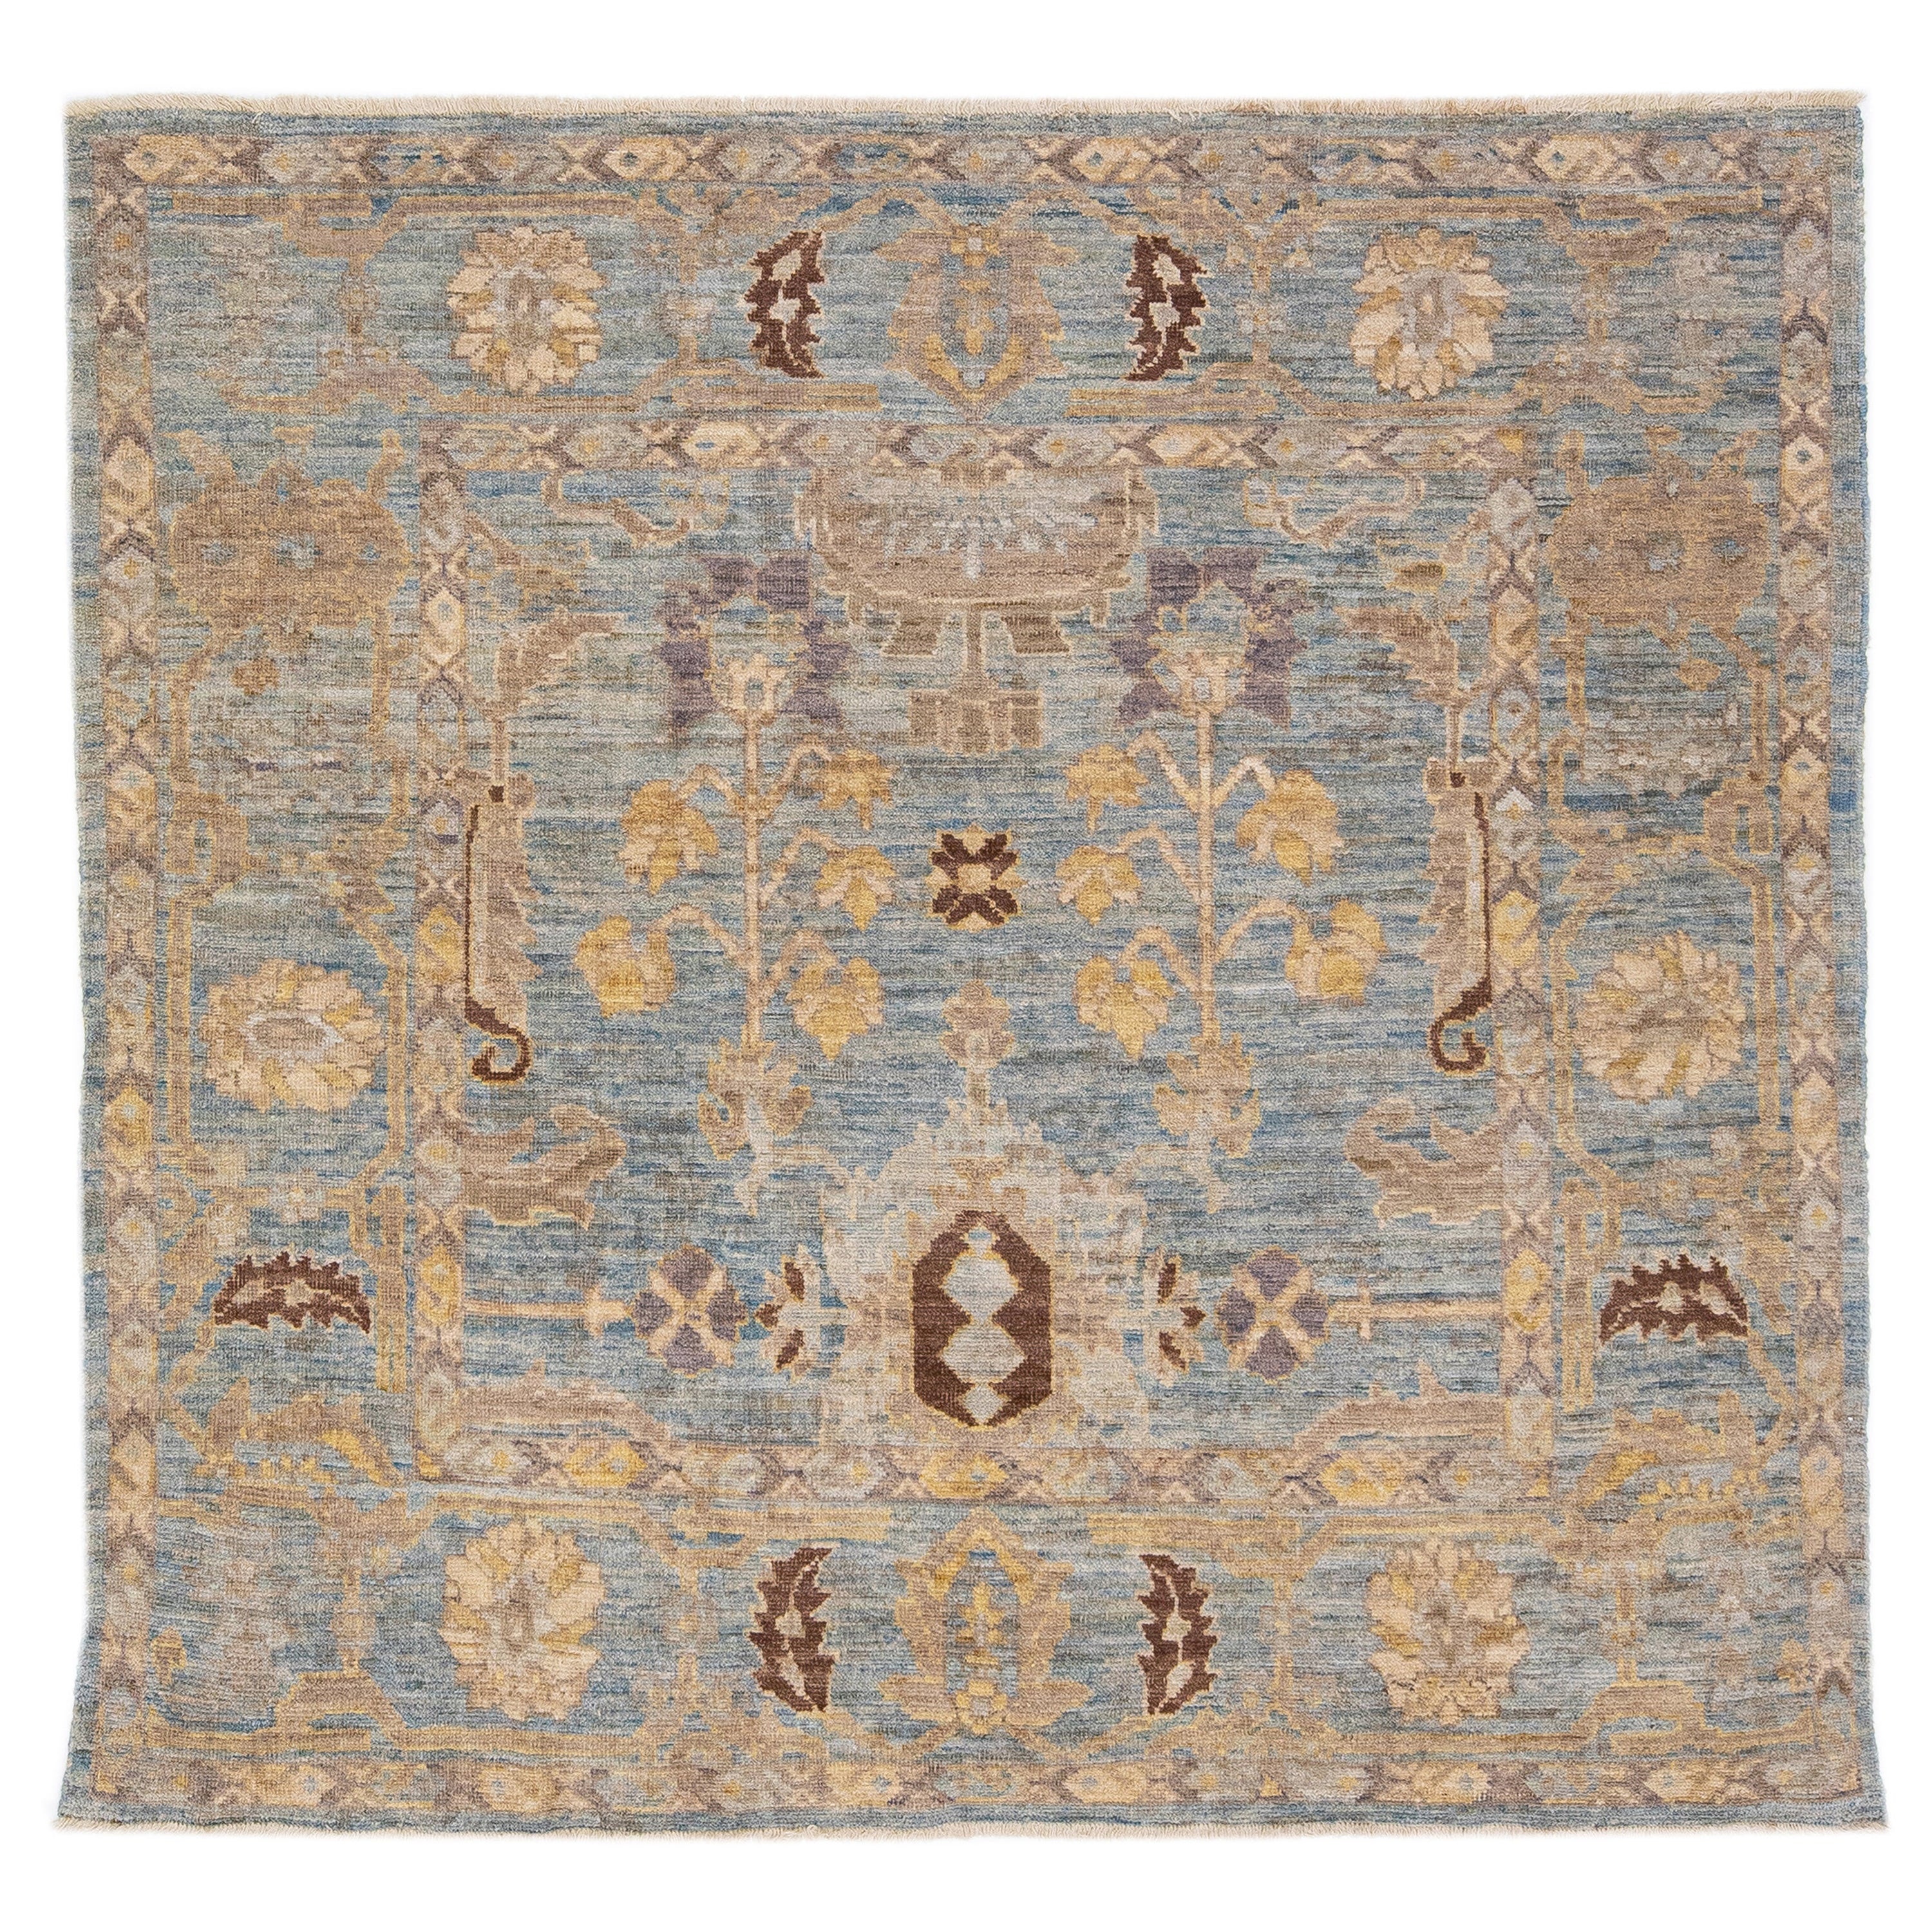 Modern Square Sultanabad Wool Rug Handmade Floral in Blue